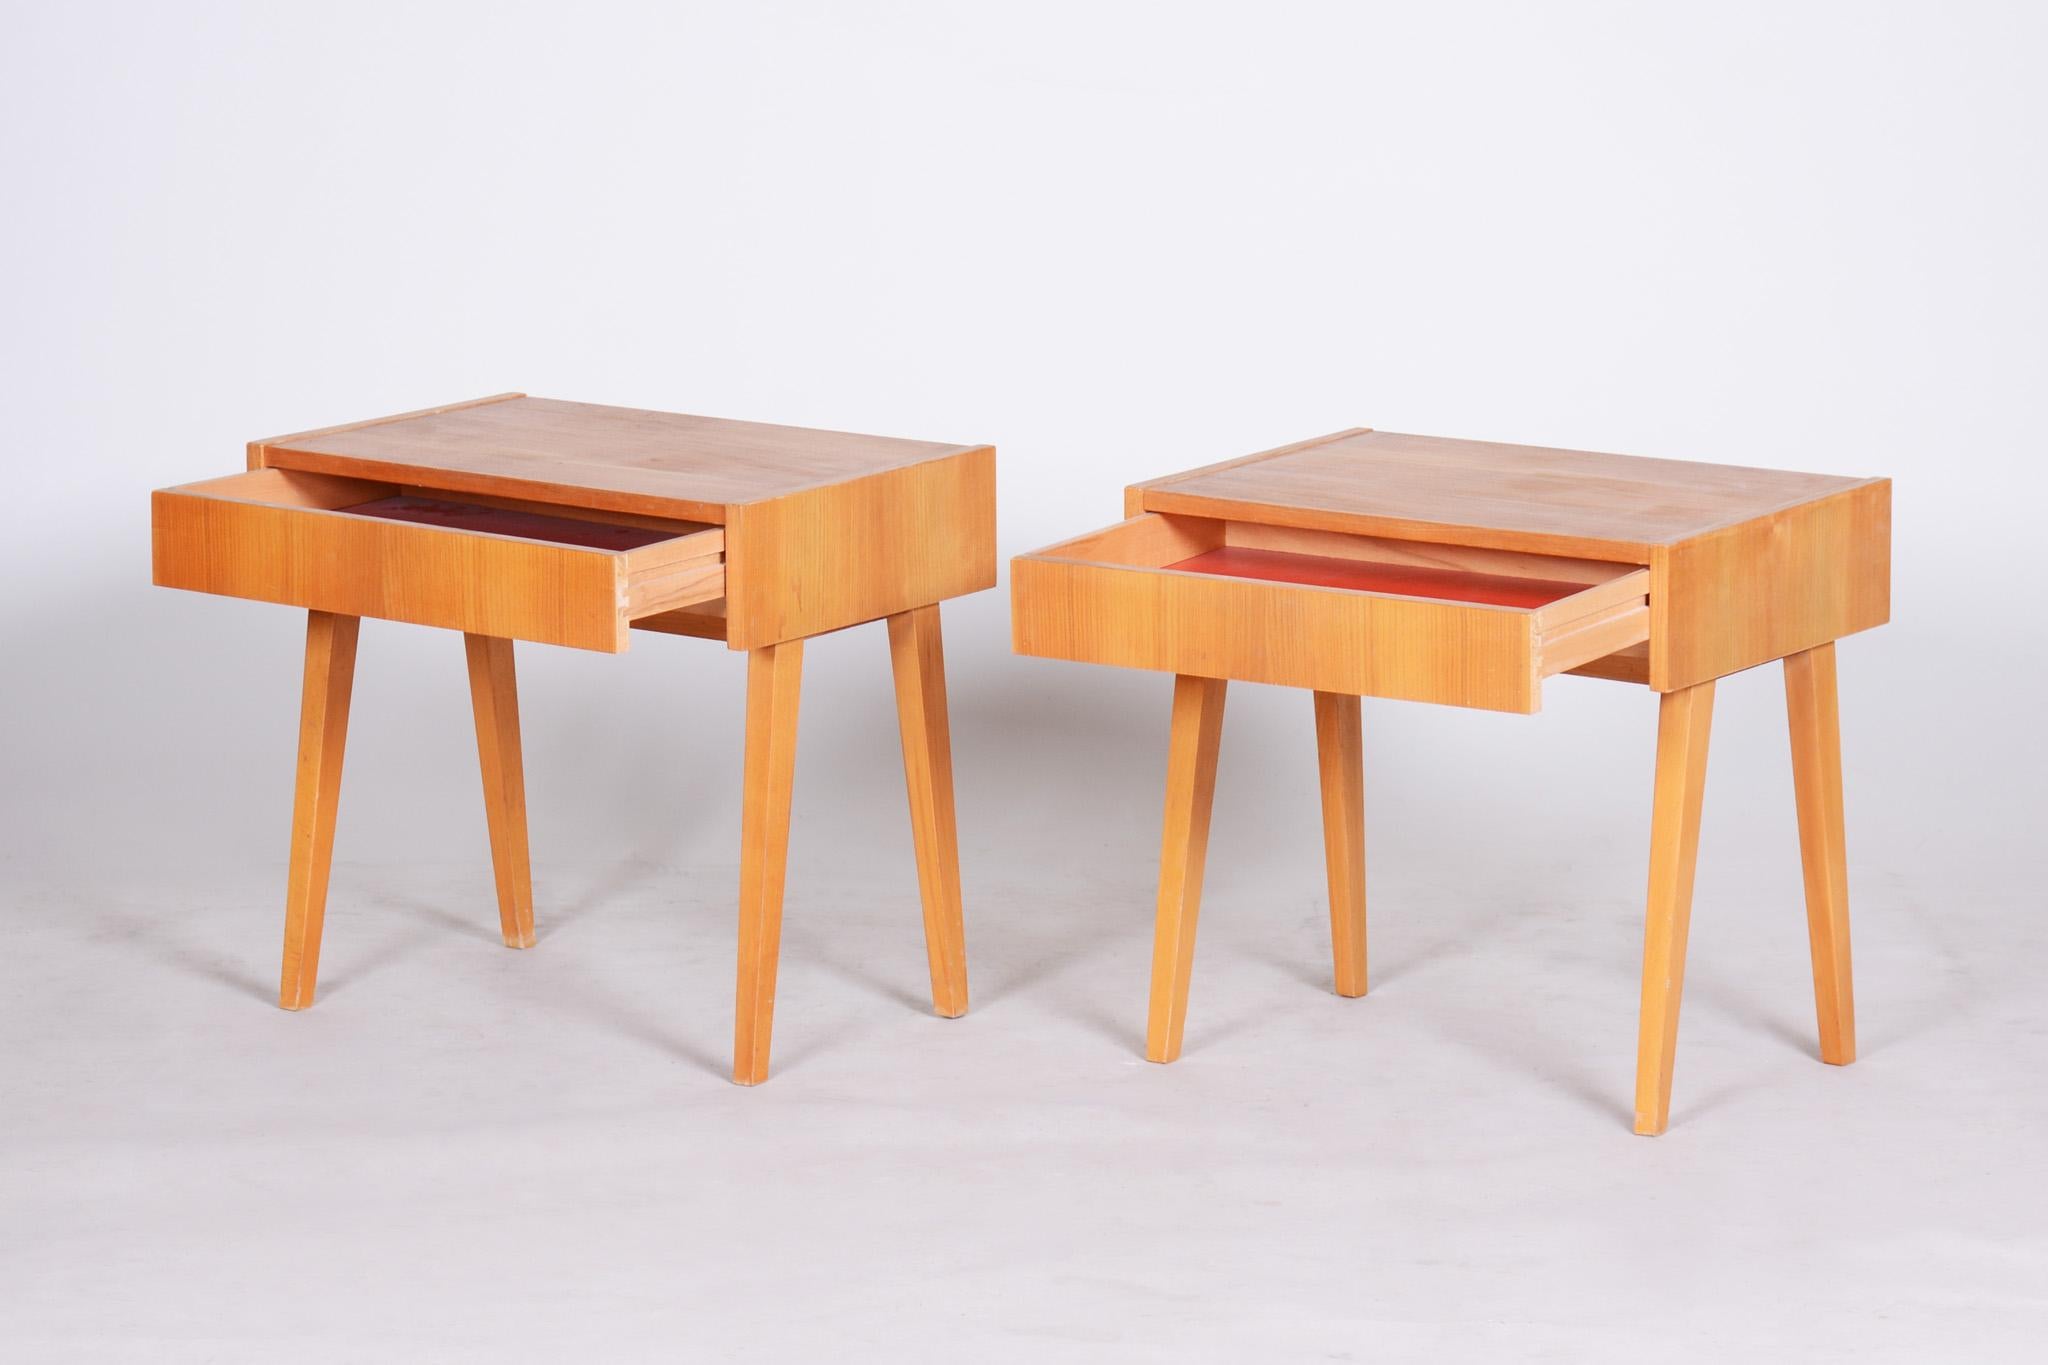 Pair of Ash Brown Midcentury Modeern Bedside Tables Made in Czechia, 1950s 2